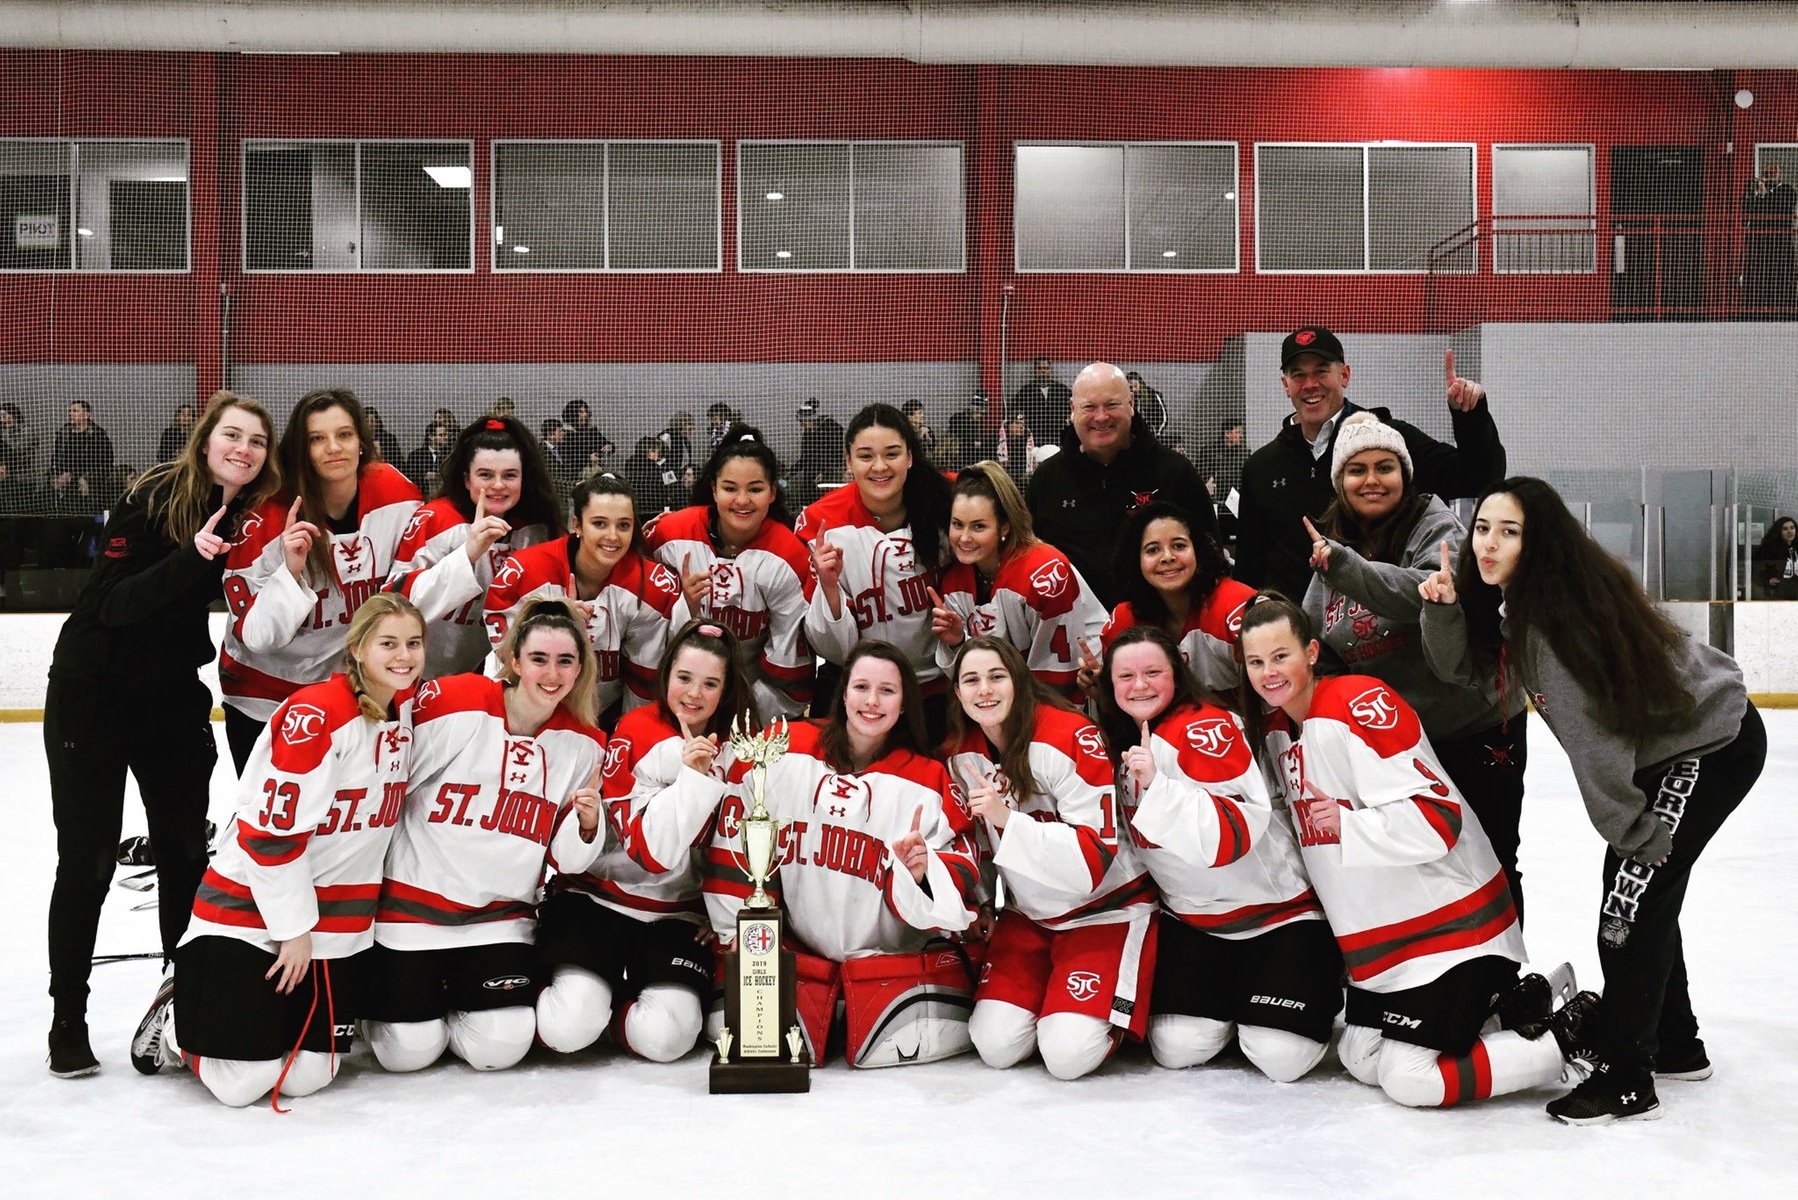 Will St. John's repeat as WCAC Girls Ice Hockey Champions on Friday?